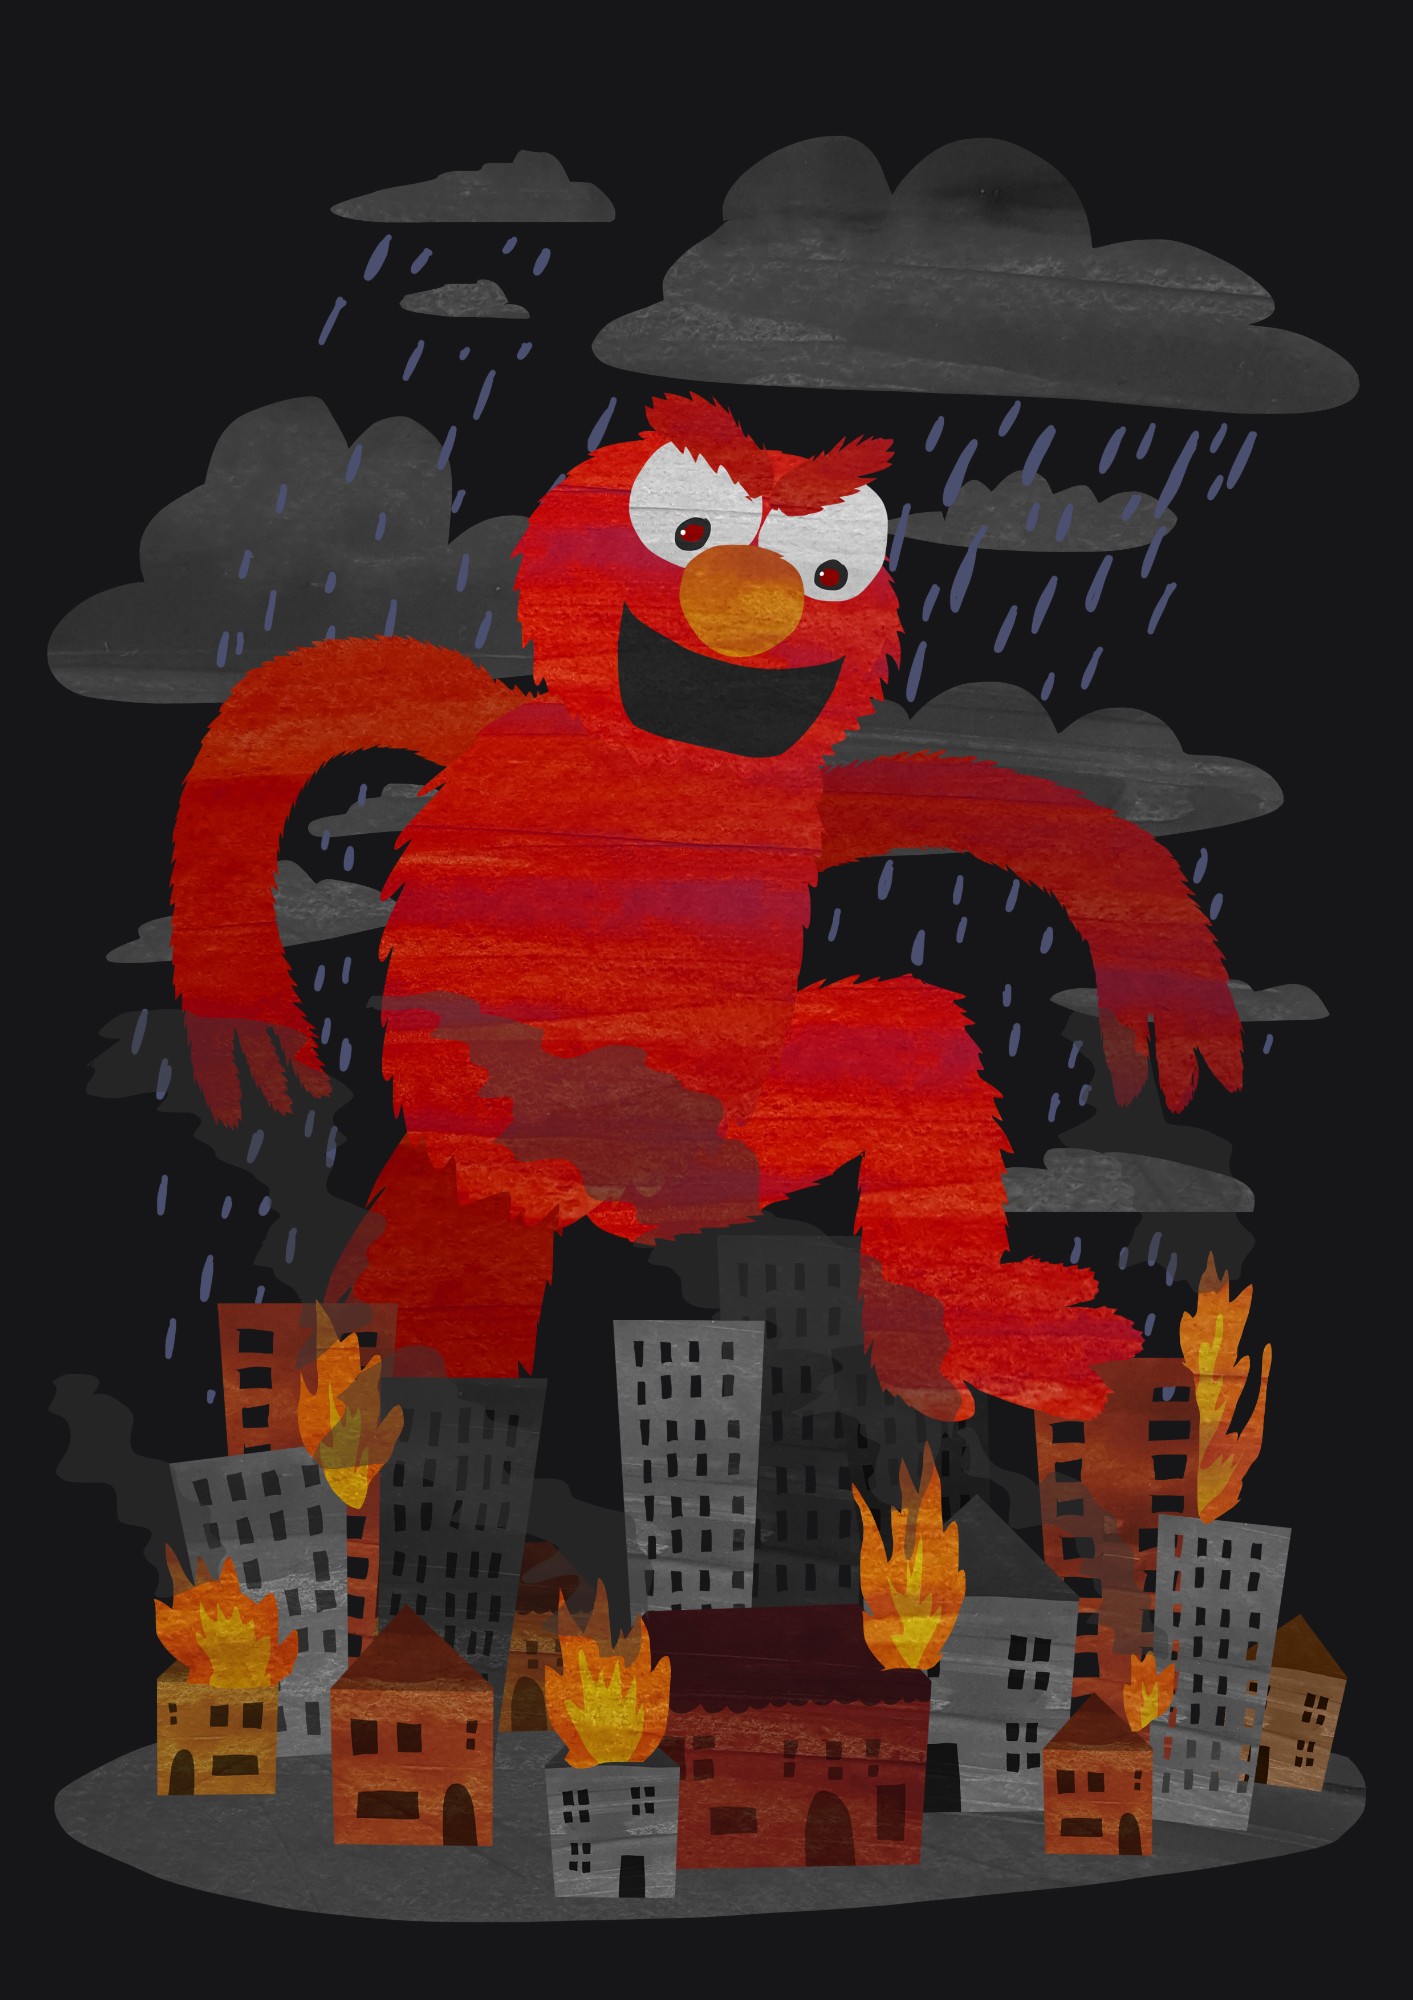 An image twisting the popular children’s toy Tickle Me Elmo and showing him destroying a city.